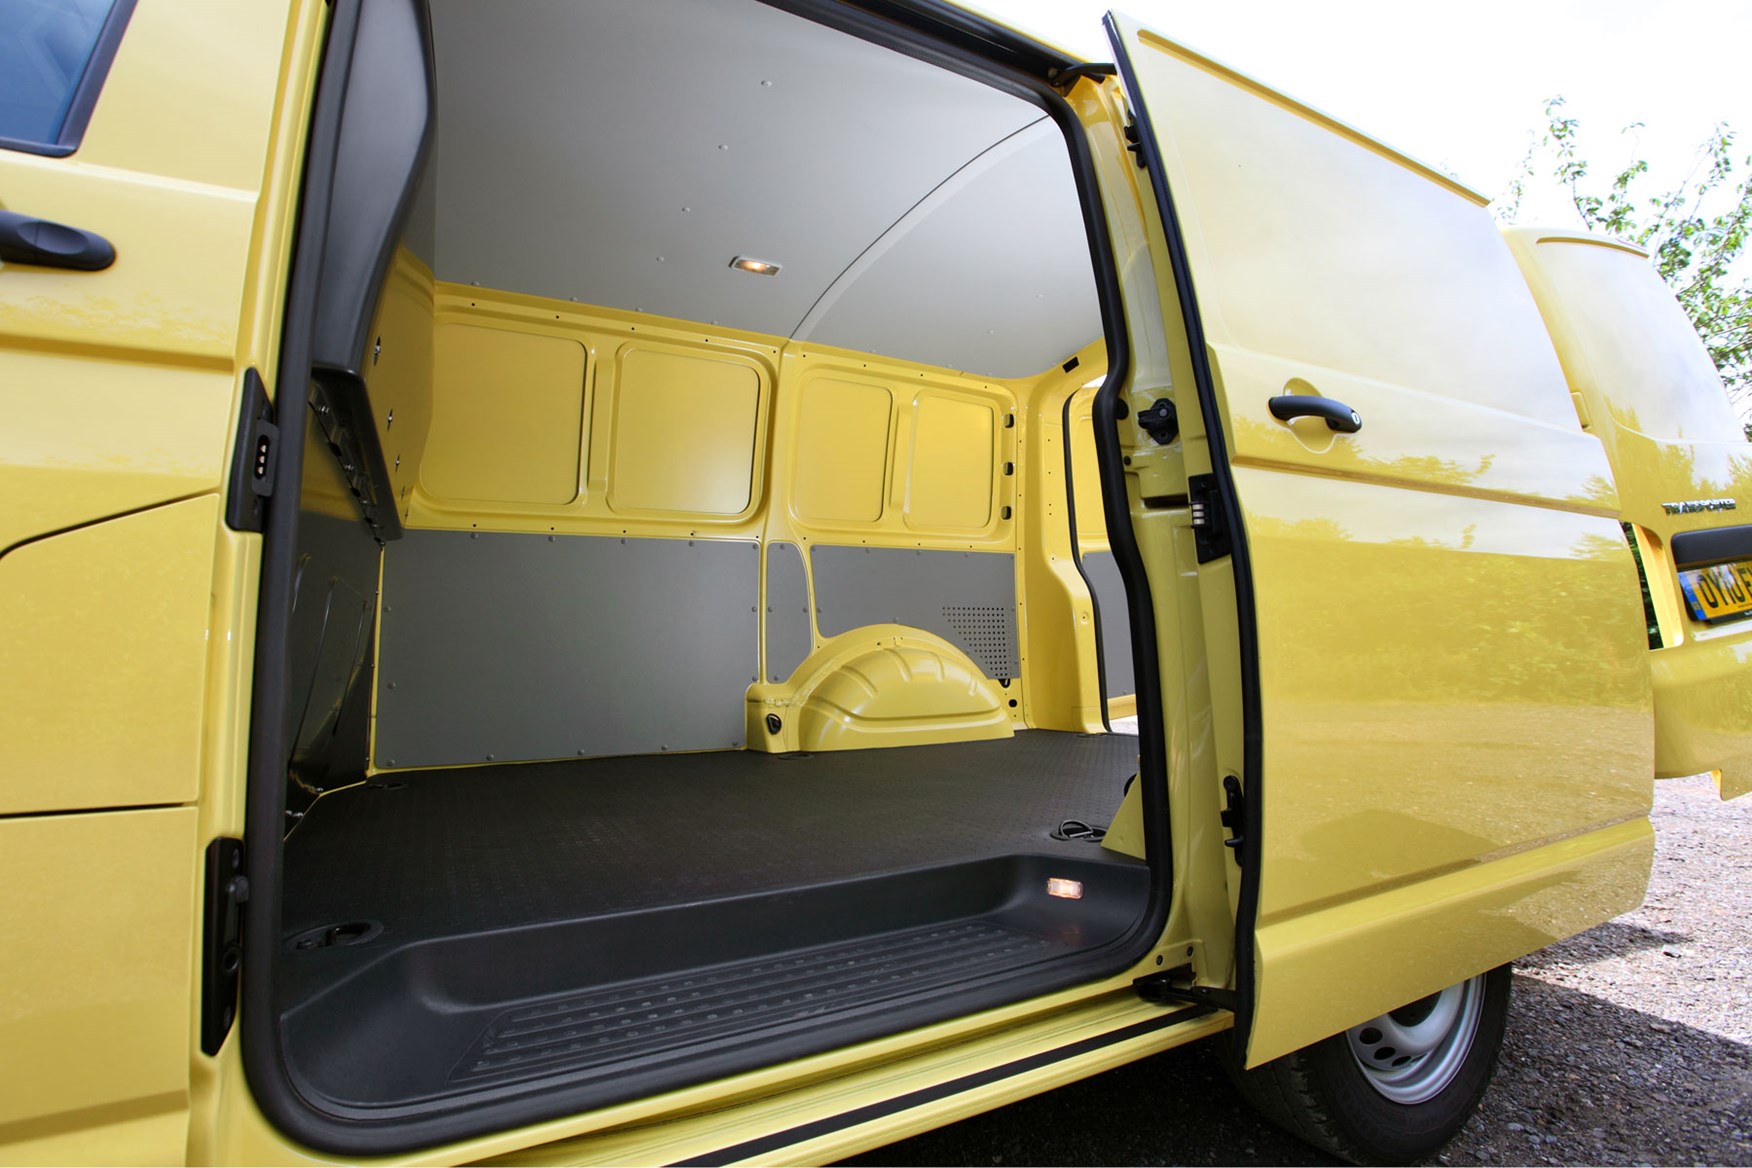 VW Transporter T5 (2010-2015) side door and load area